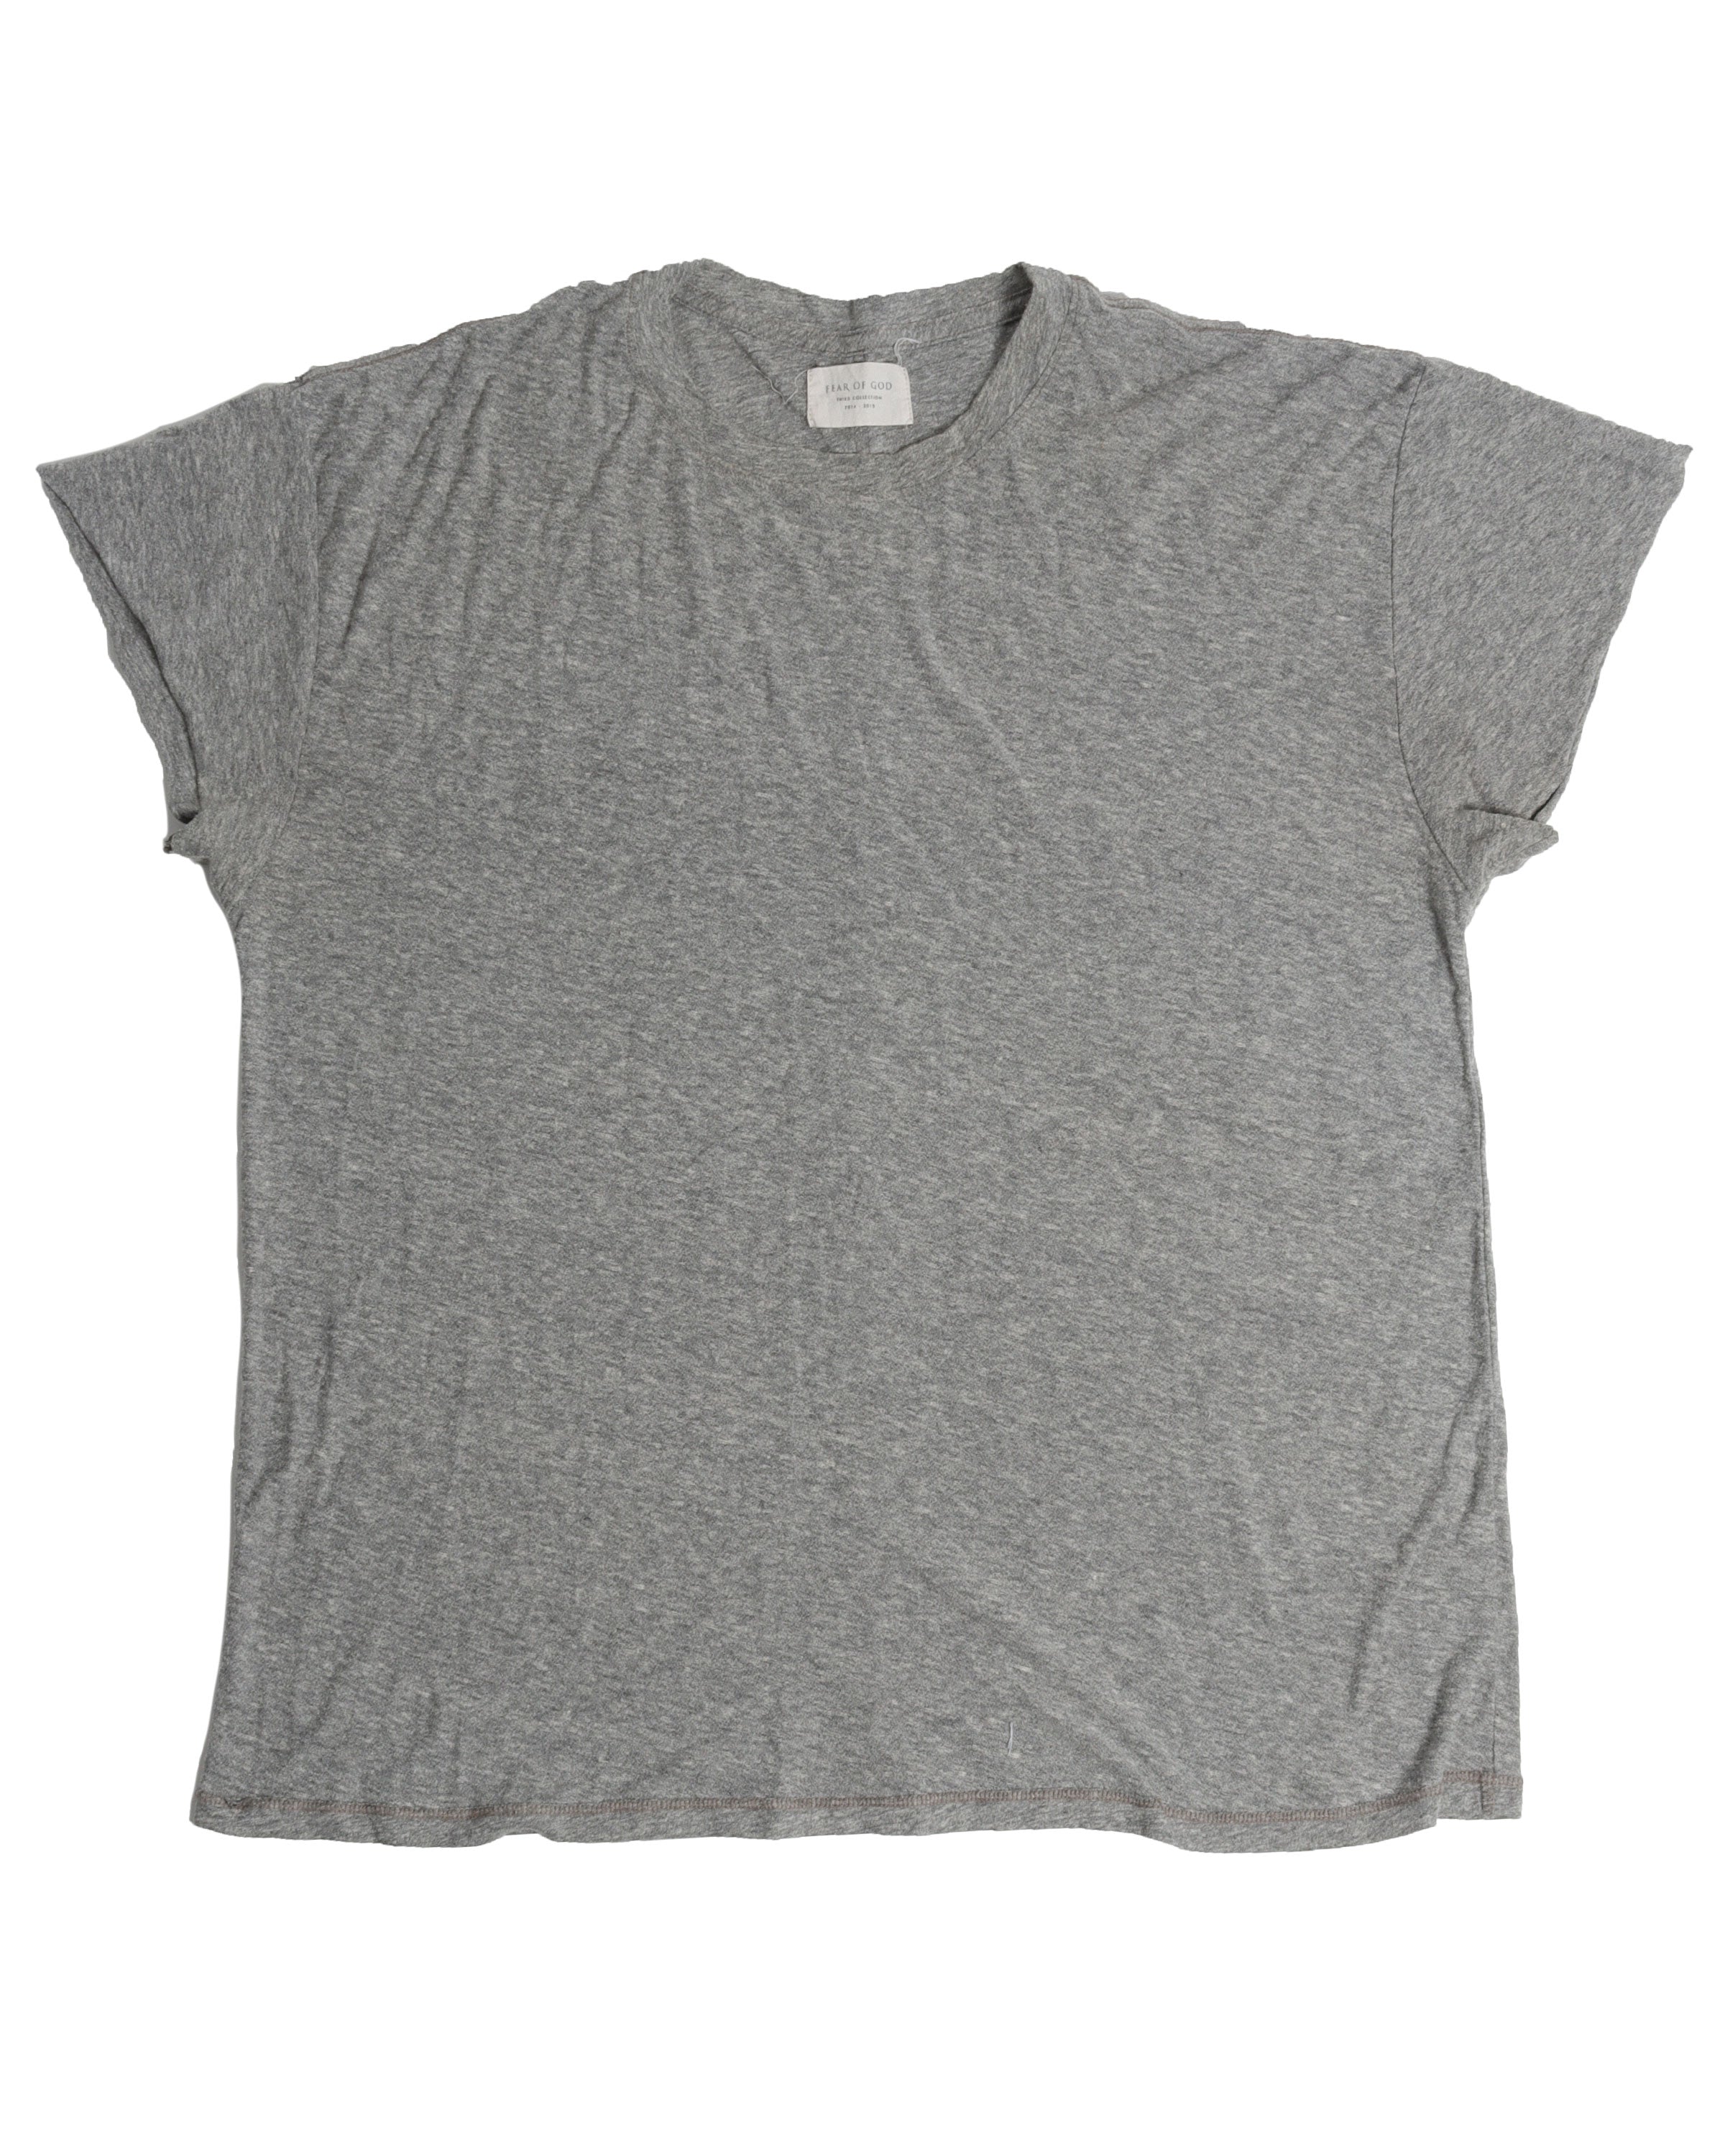 3rd Collection Grey Shirt